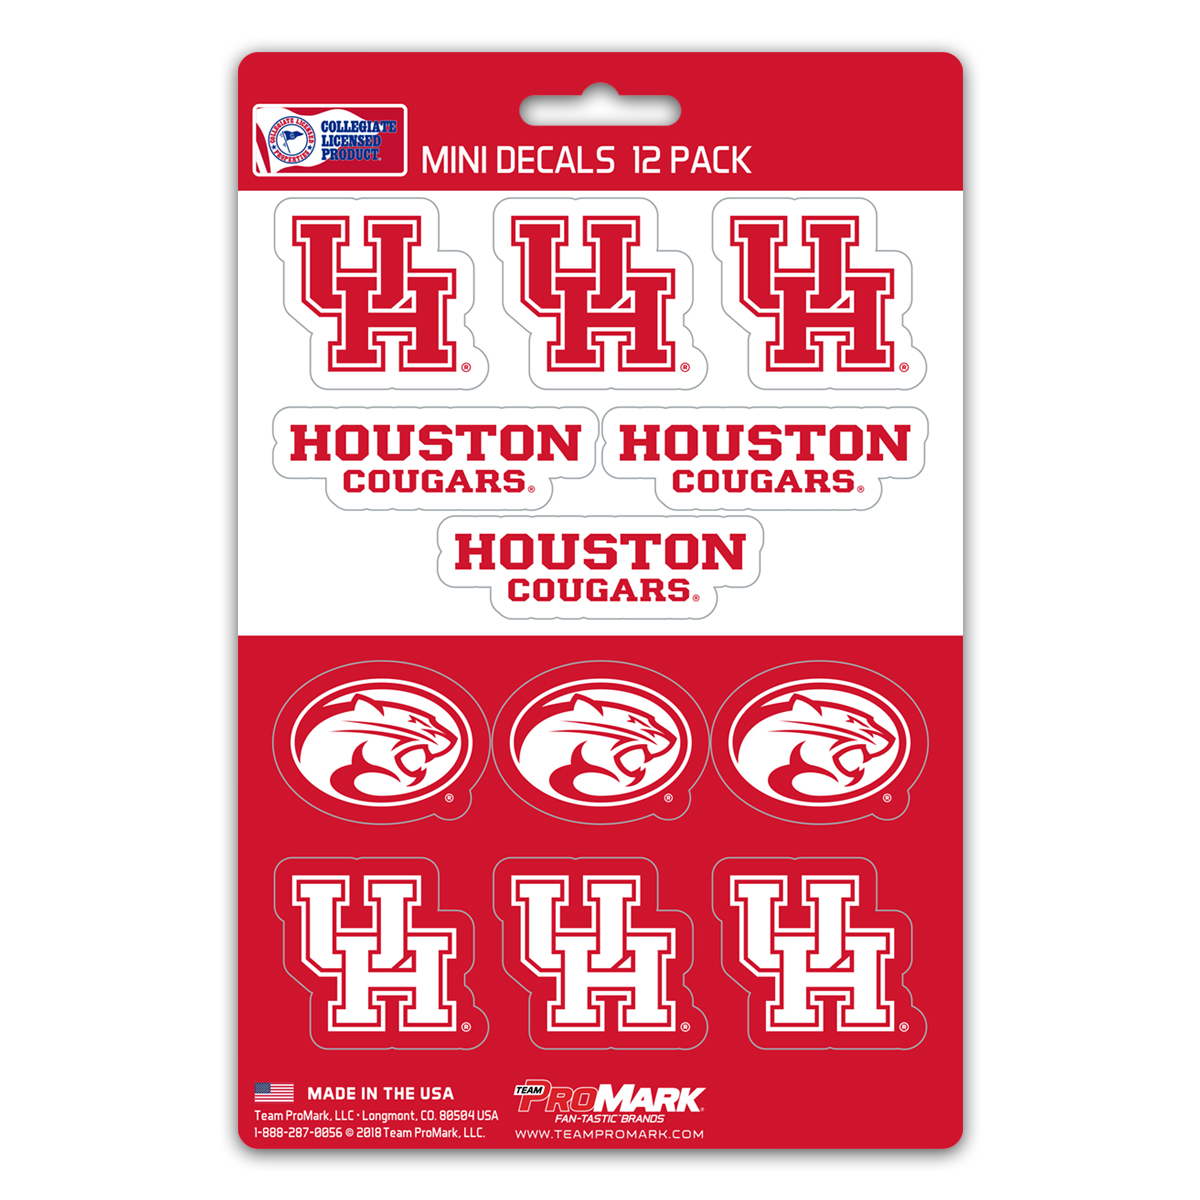 Houston Cougars Decal Set Mini 12 Pack - Special Order